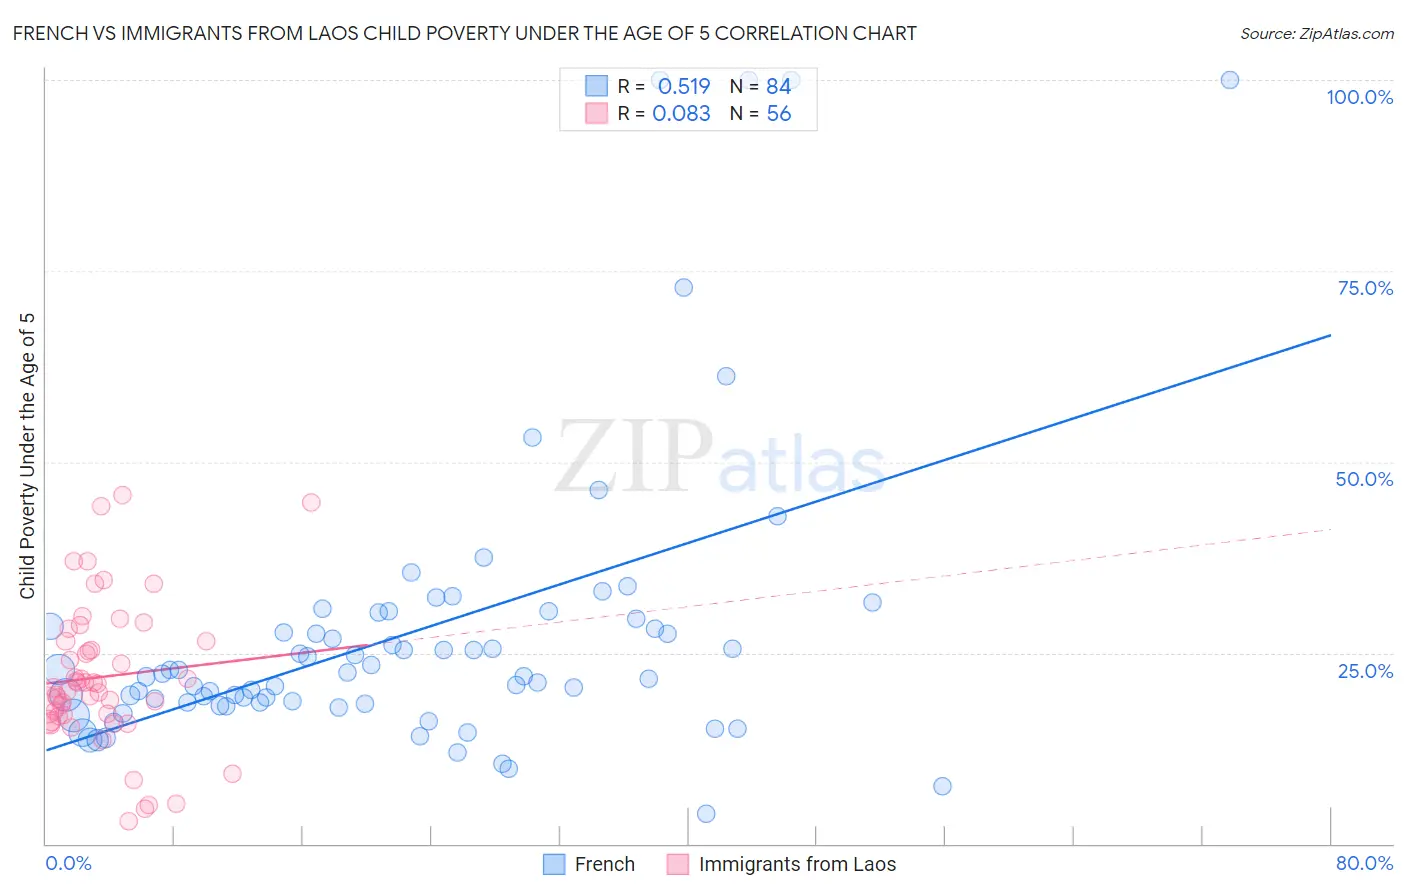 French vs Immigrants from Laos Child Poverty Under the Age of 5